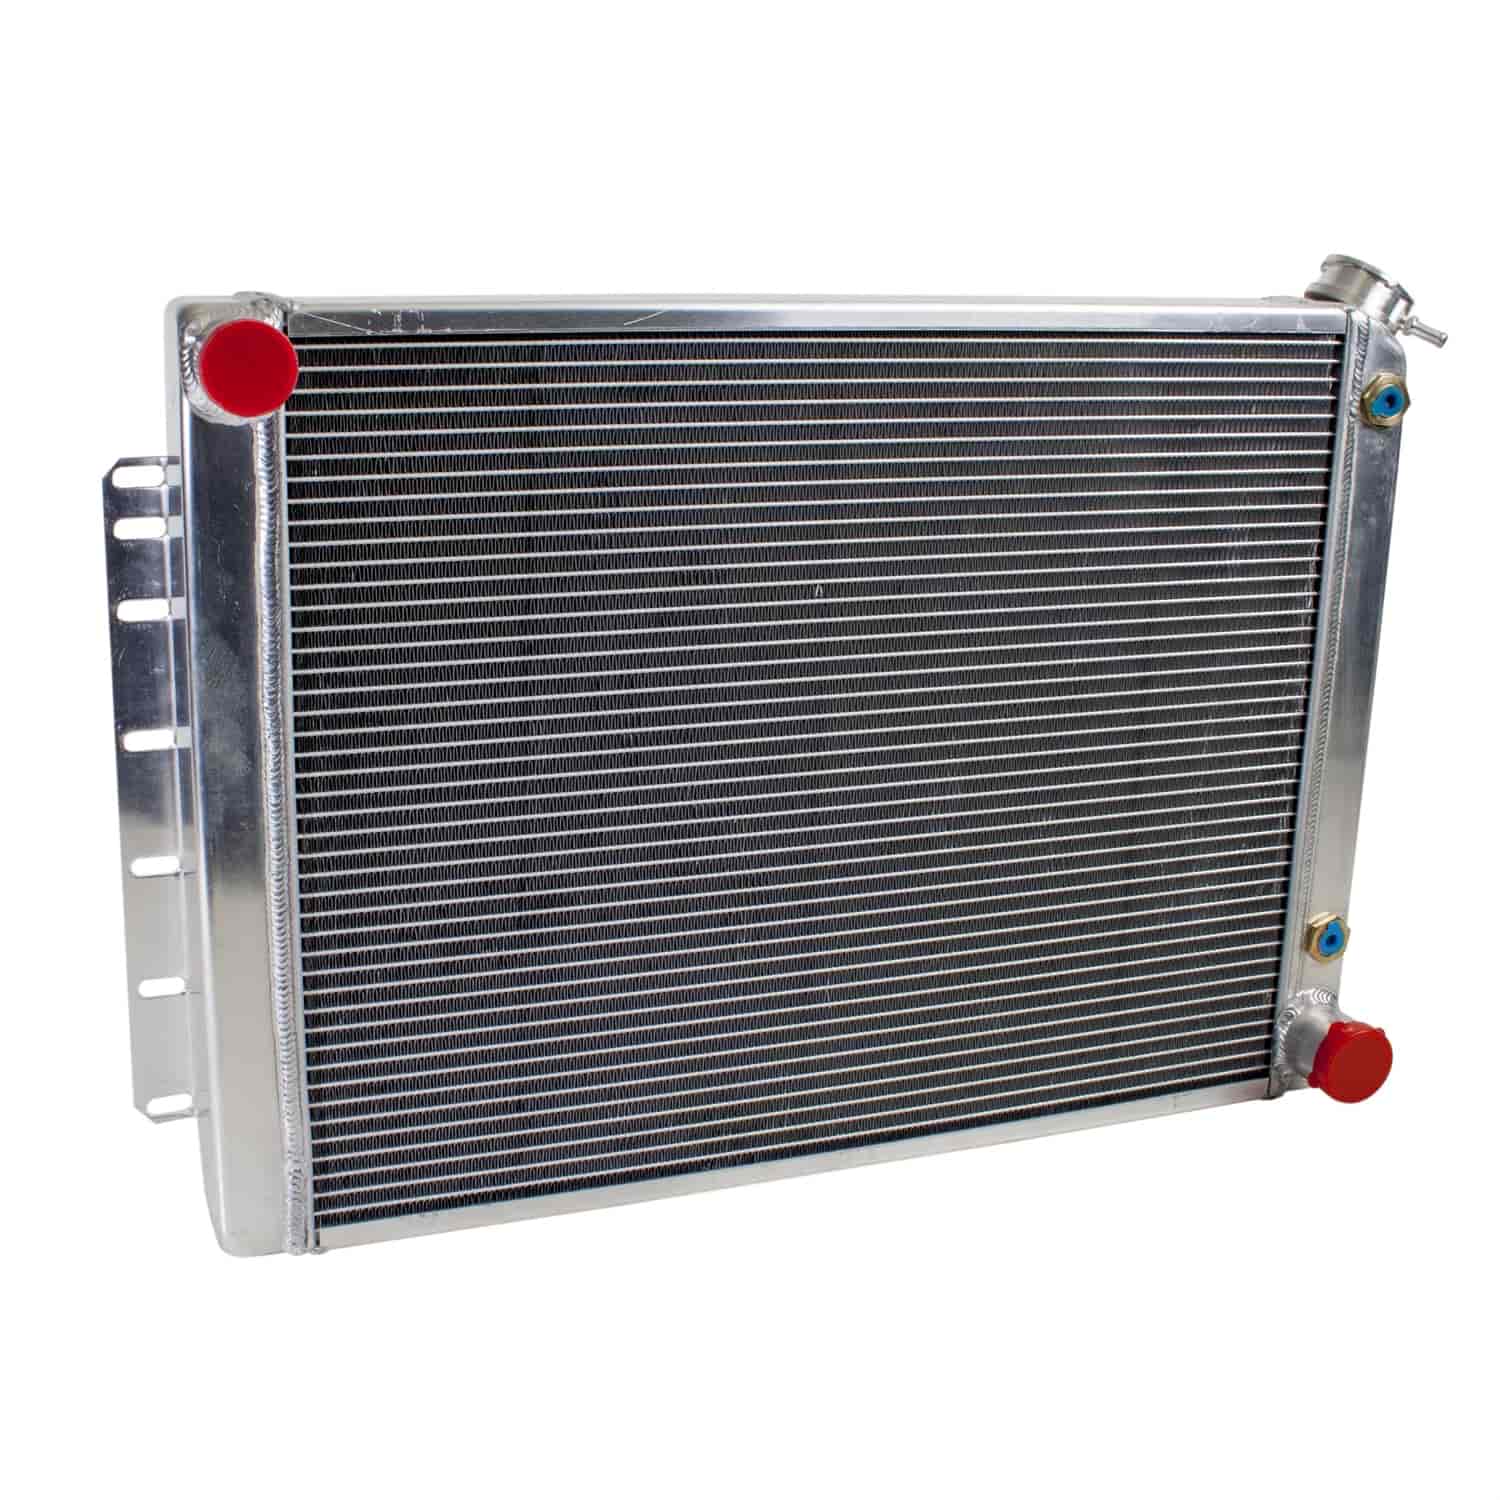 PerformanceFit Radiator for GM 1959-1970 B Body with